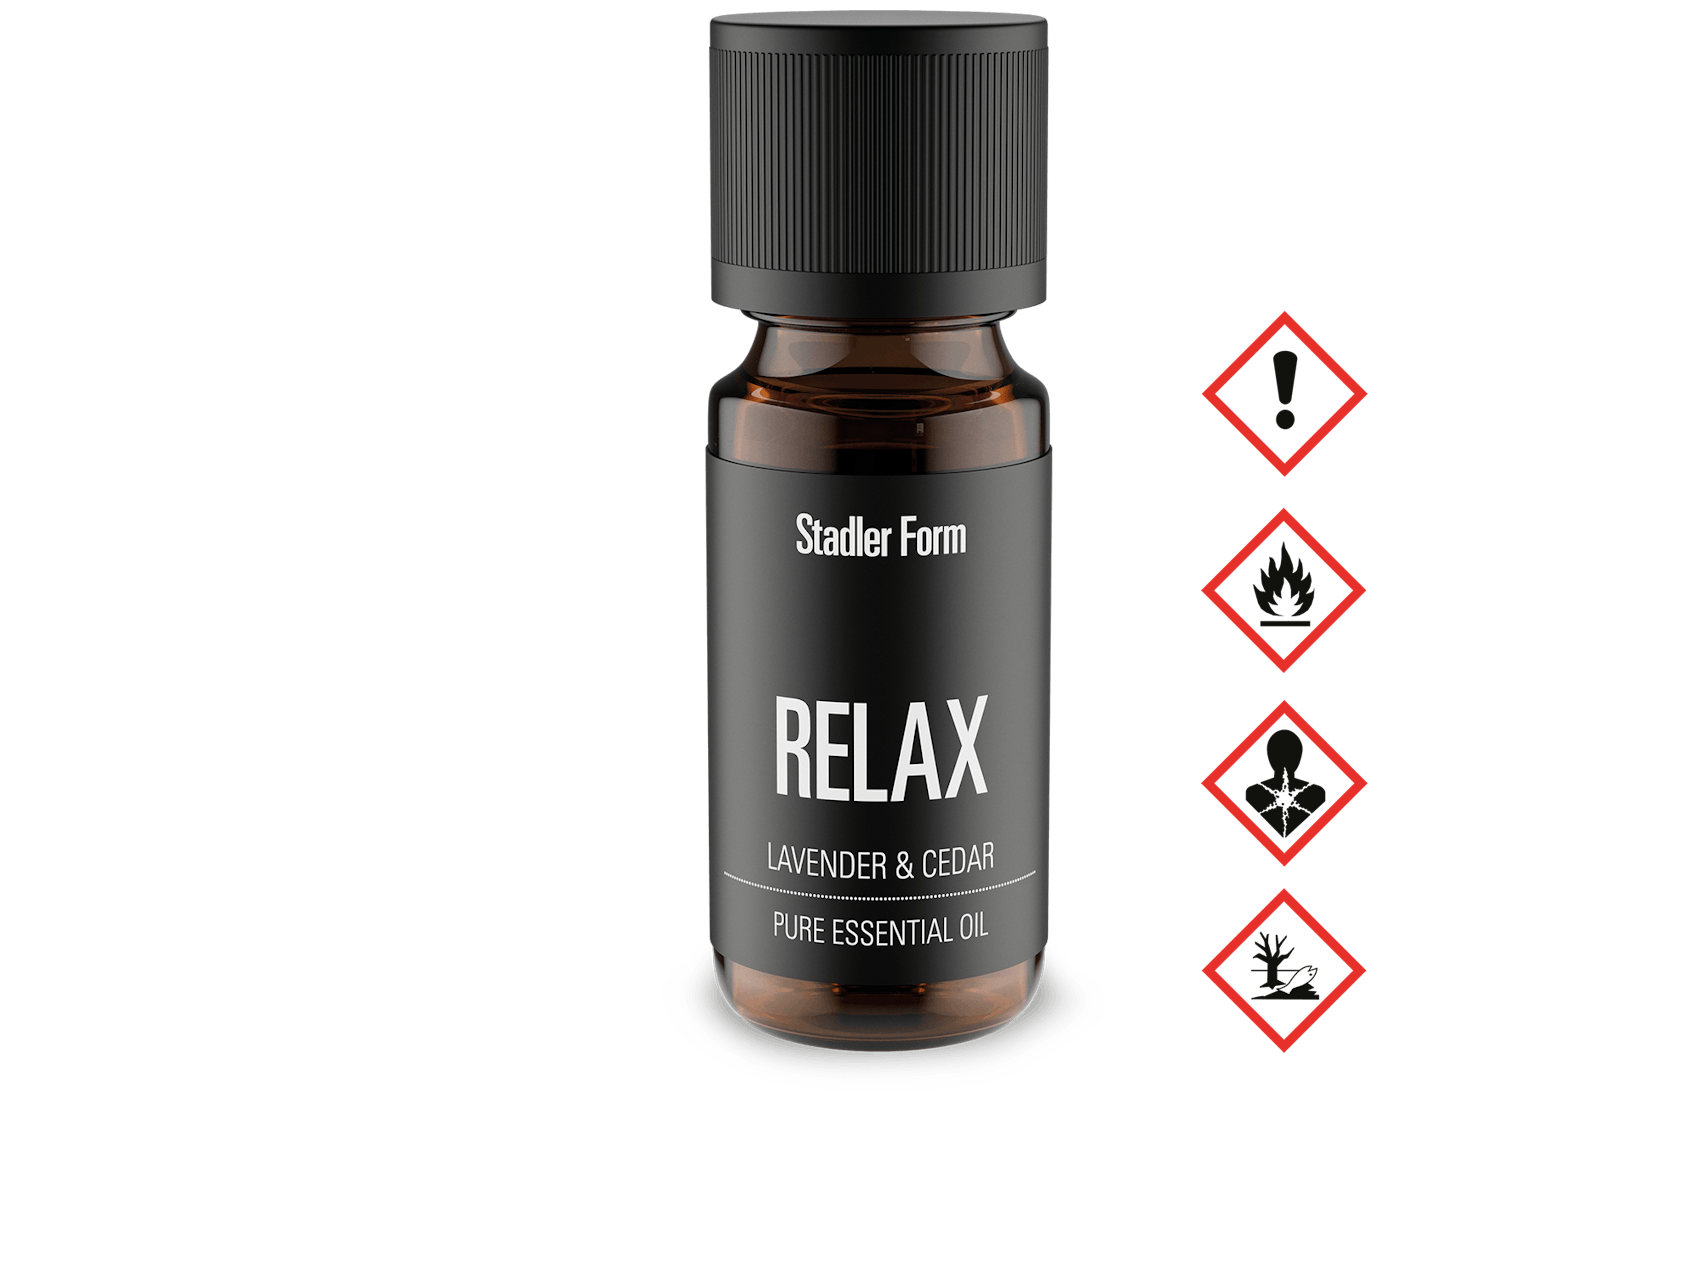 Relax essential oil by Stadler Form with symbols